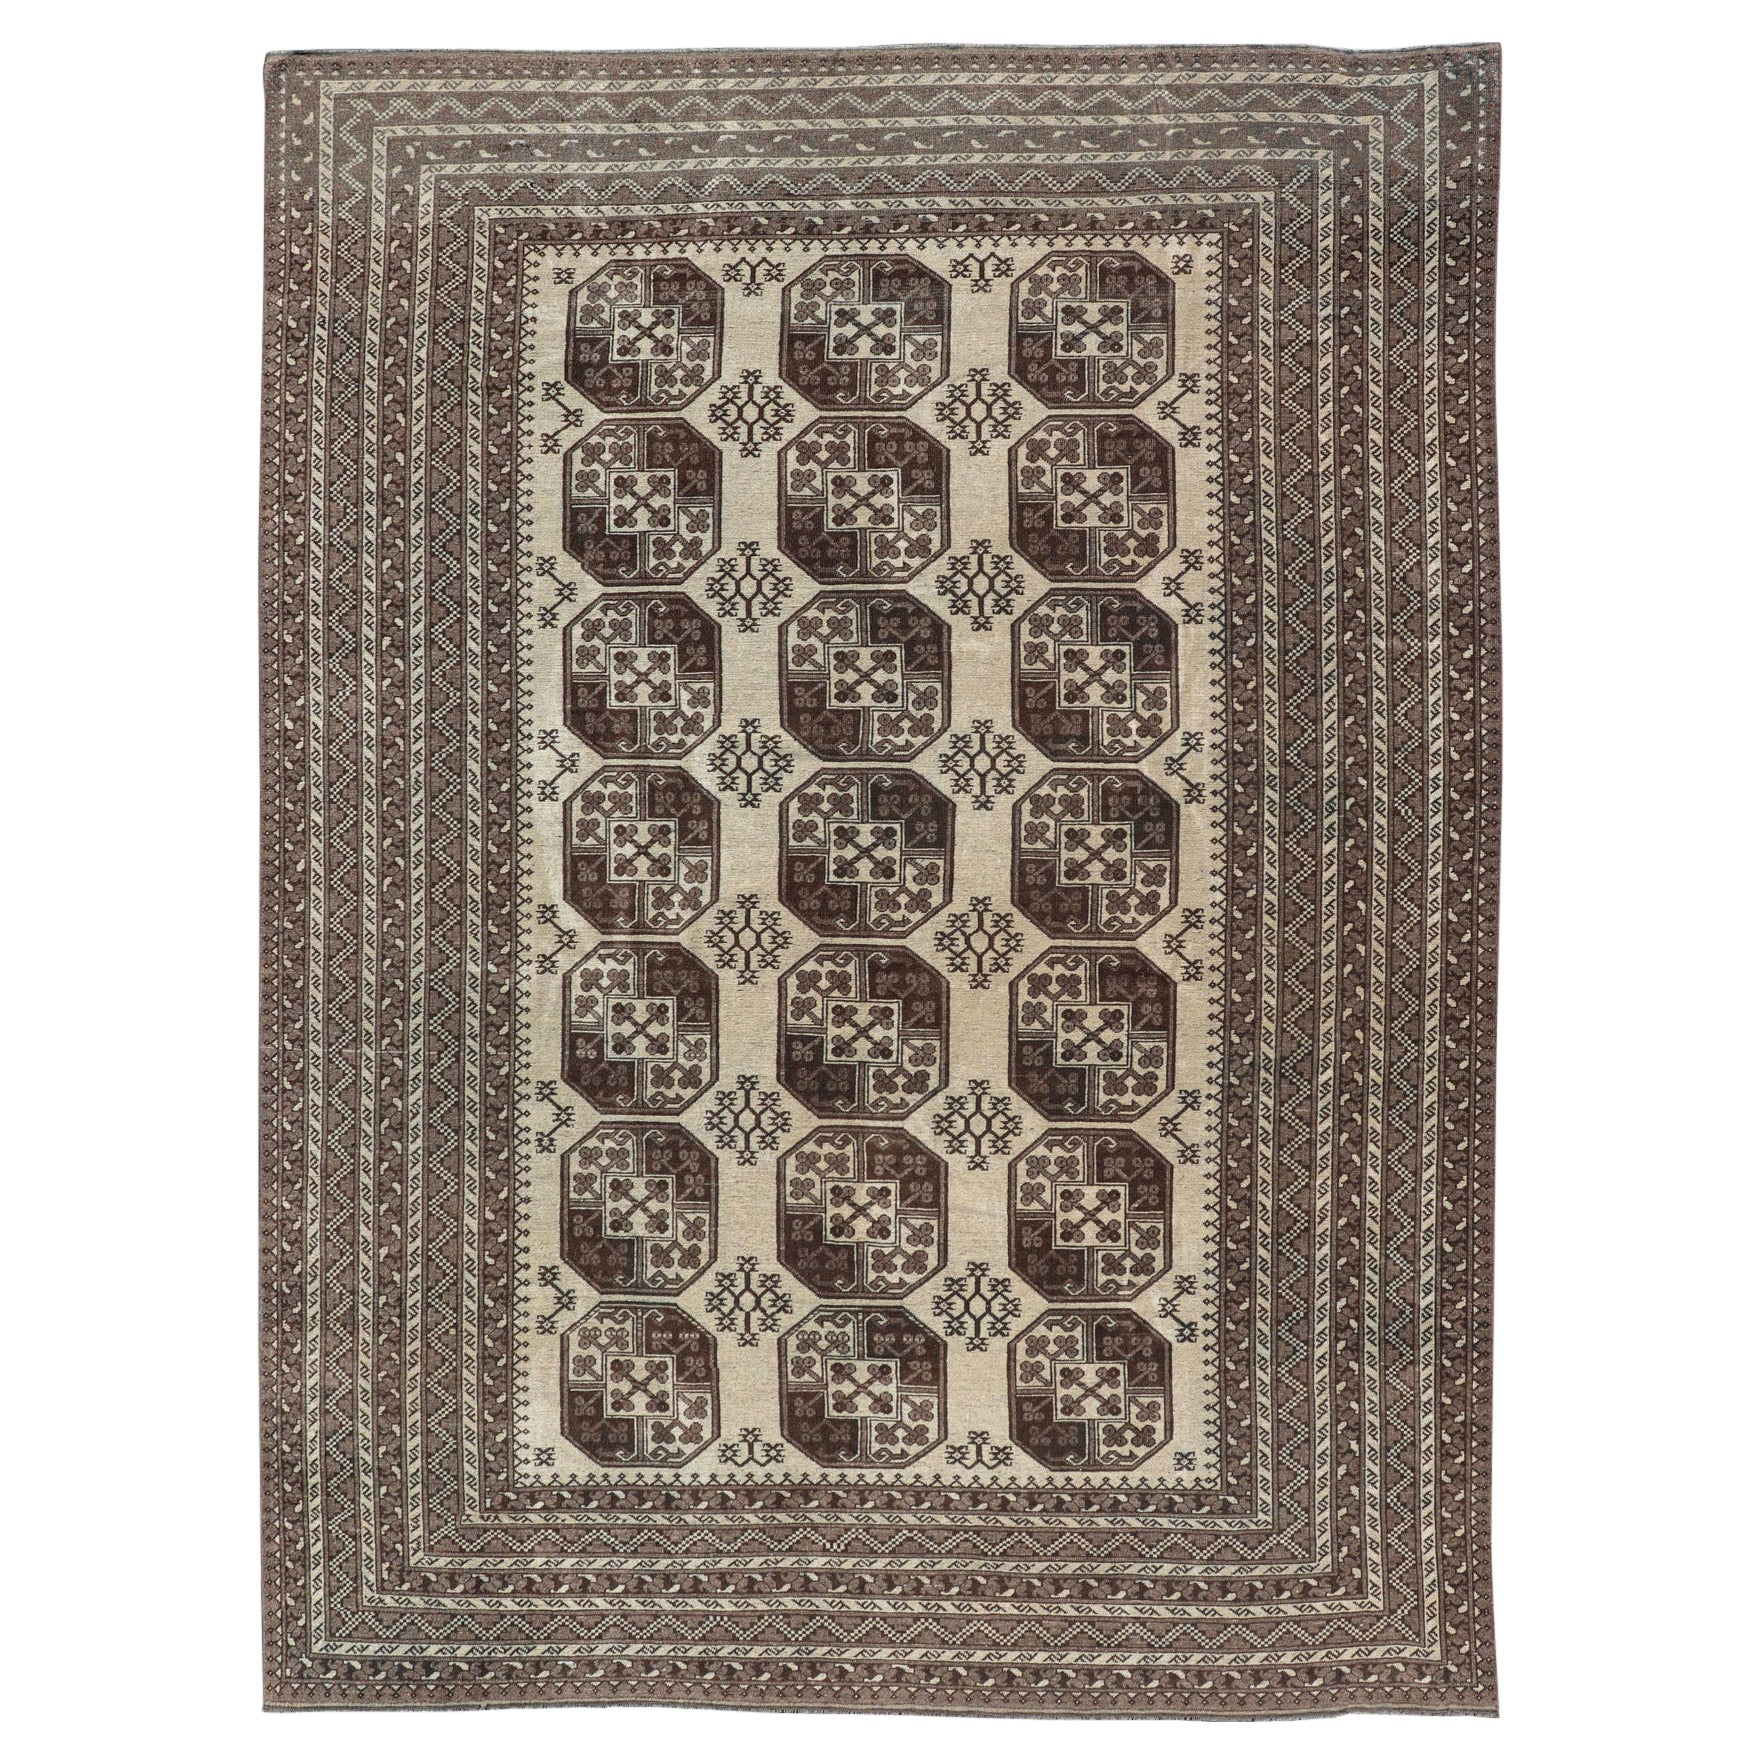 Vintage Turkomen Ersari Rug in Wool with All-Over Repeating Gul Design